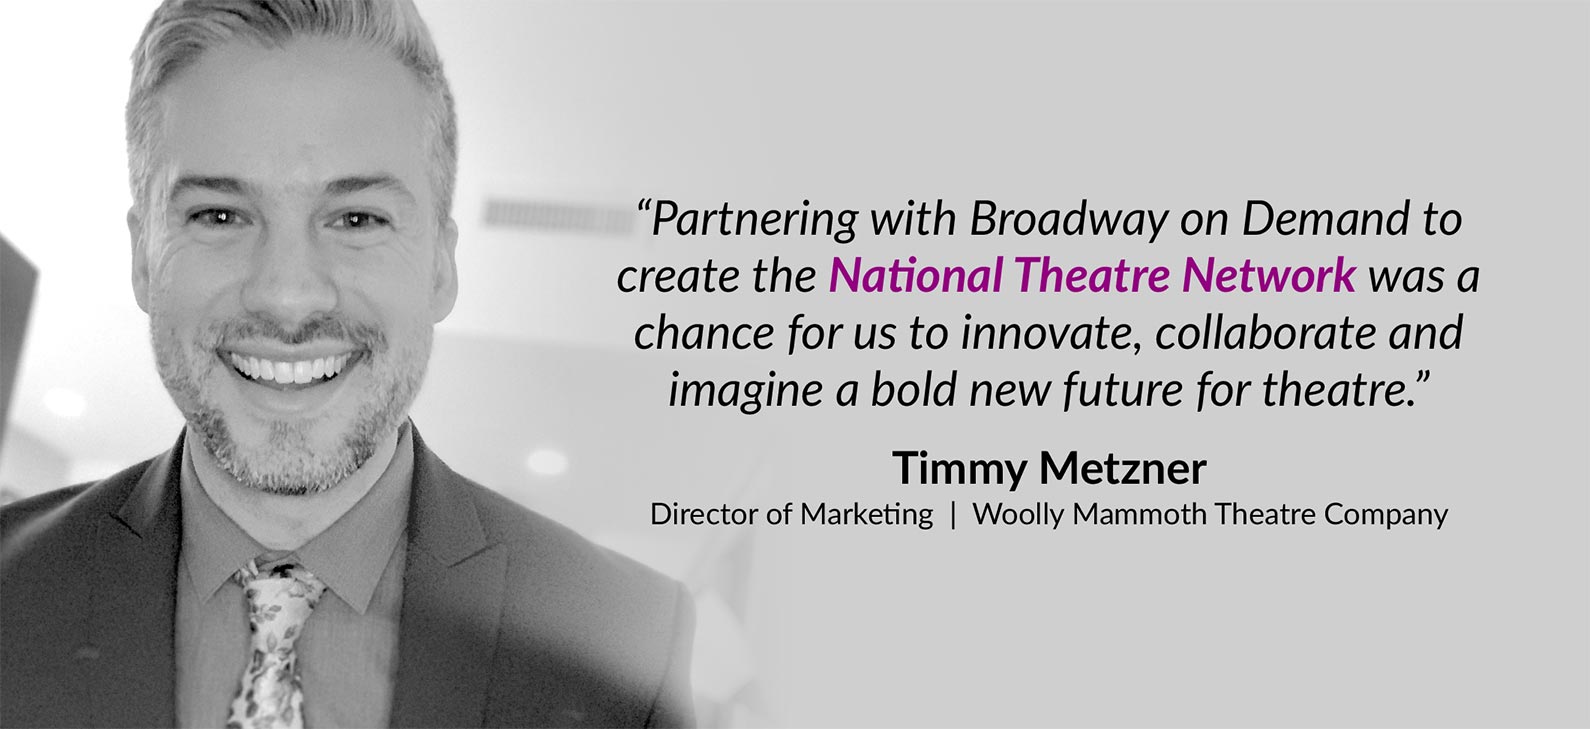 Timmy Metzner Quote, Woolly Mammoth Theatre Company